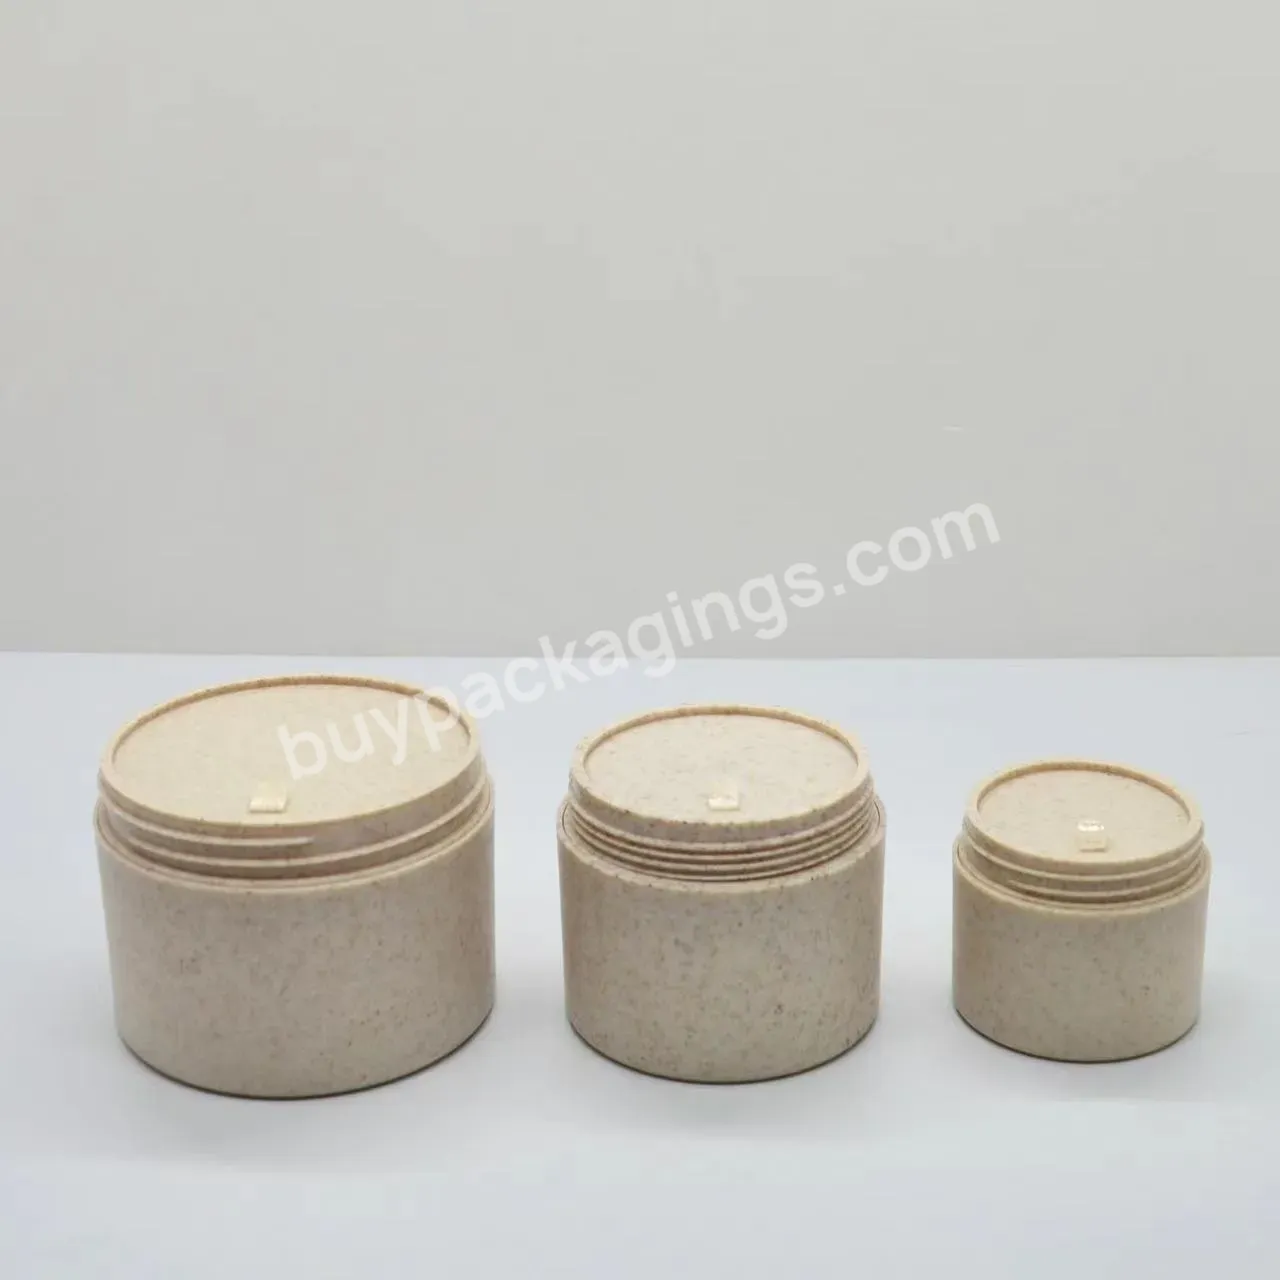 Biodegradable Wheat Straw Bottle Custom 10-250ml Eco Friendly Wheat Straw Jars Plastic Cosmetic Packaging Container Jar - Buy Plastic Cosmetic Jars,Wheat Straw Jars,Biodegradable Wheat Straw Bottle.